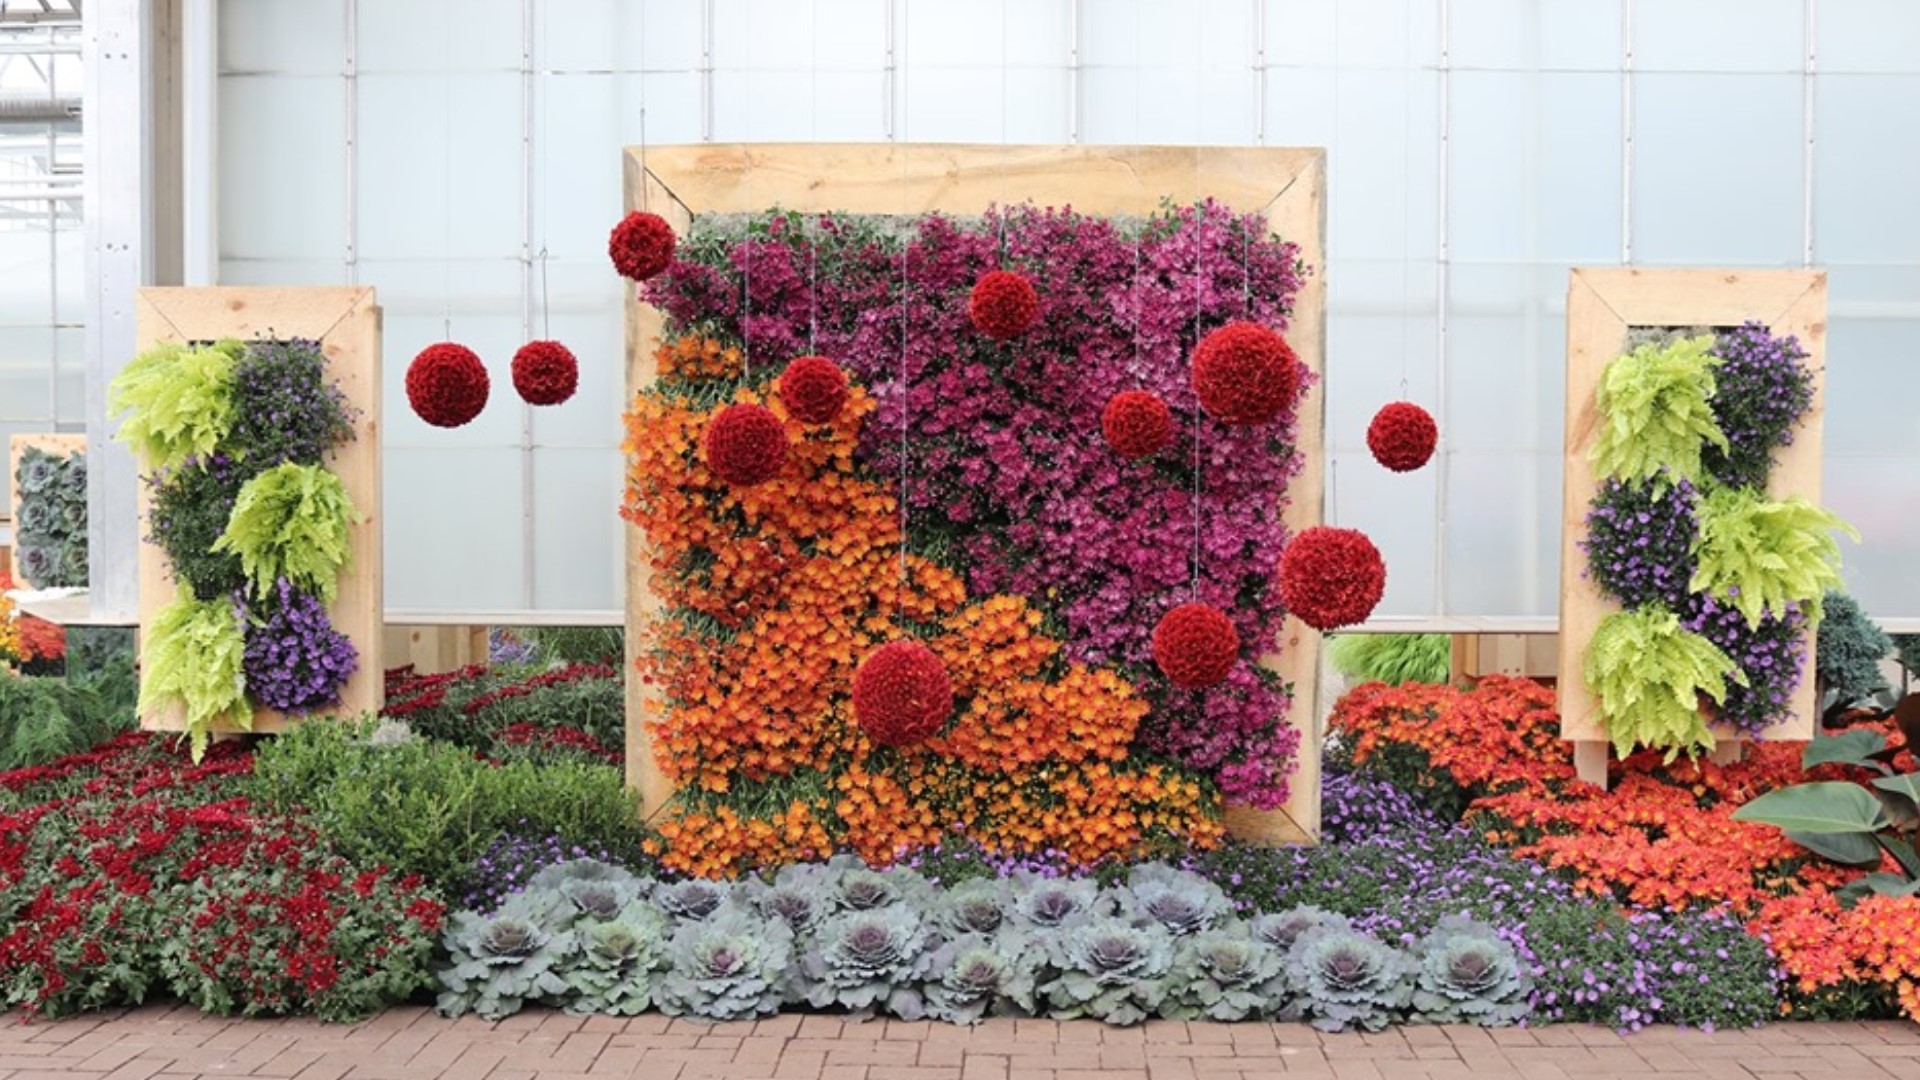 Chrysanthemums & More! exhibition explores untamed aspects of fall